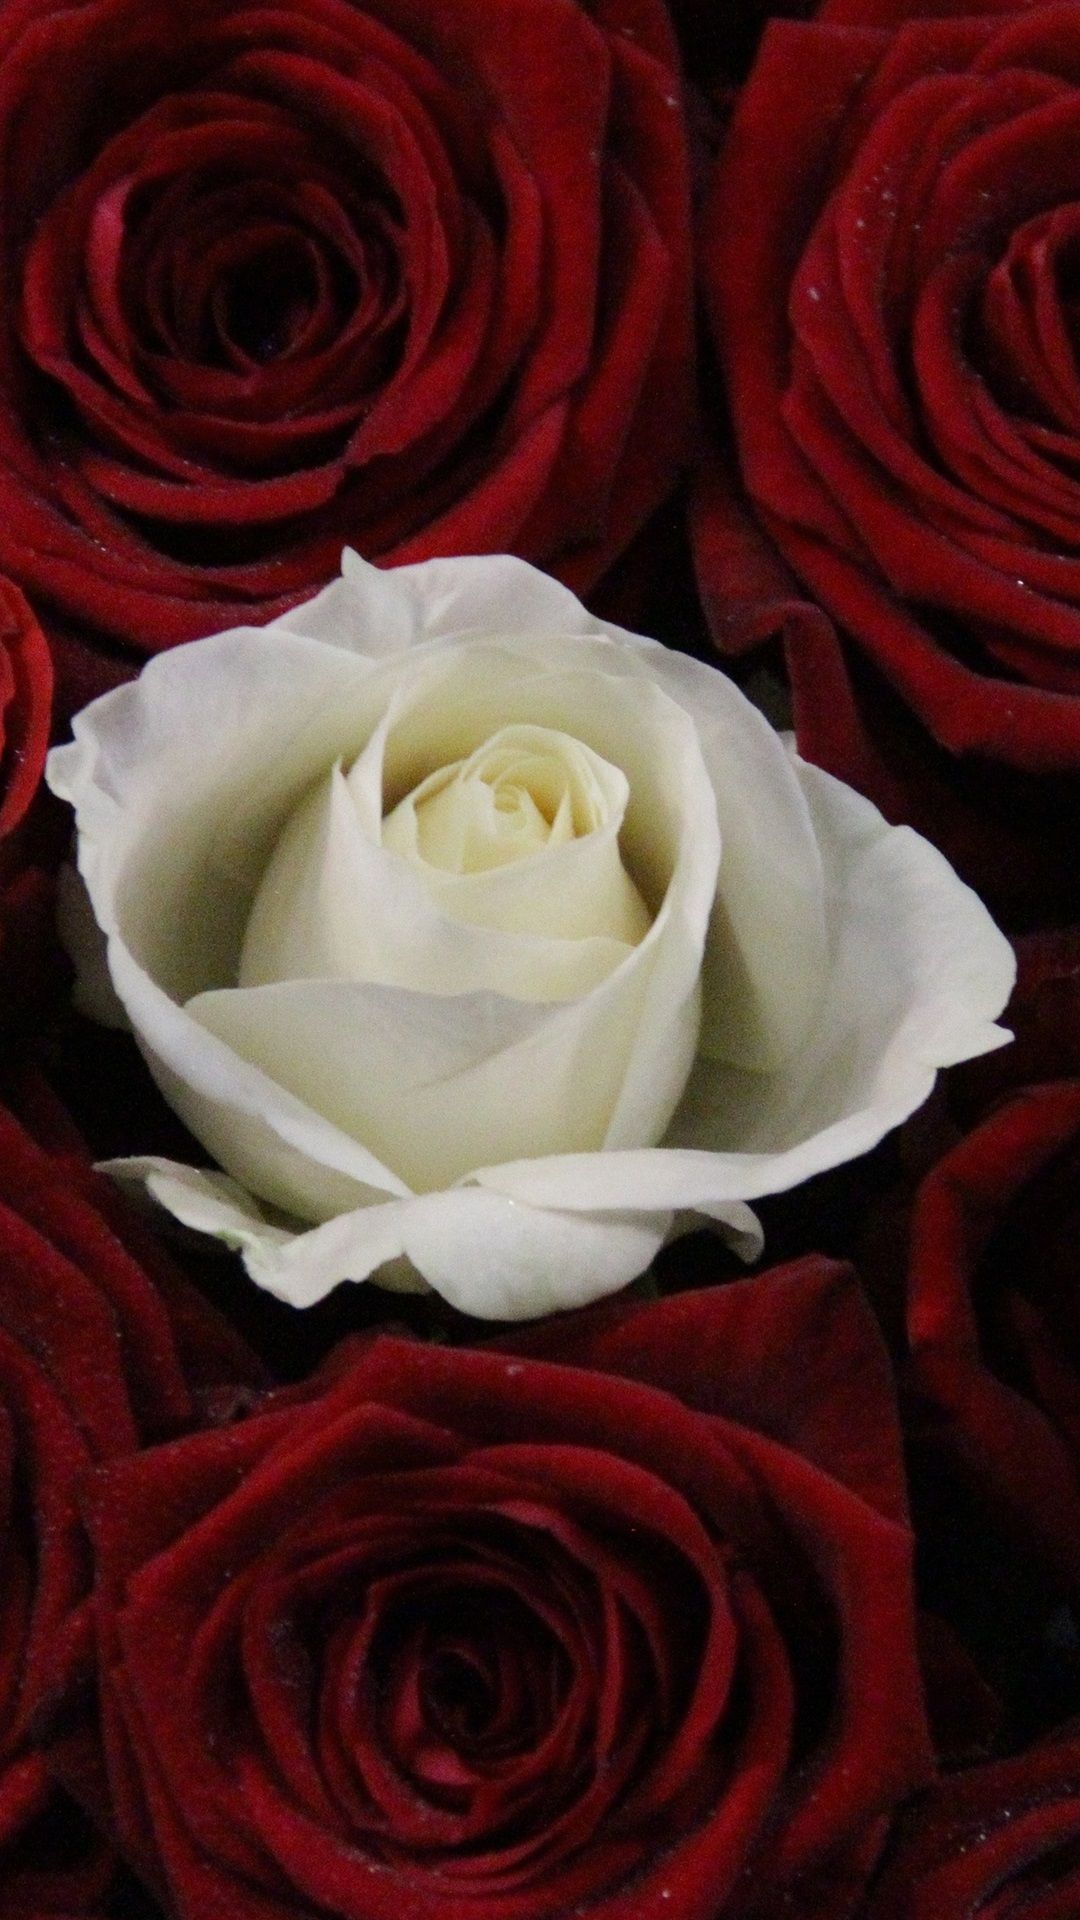 One White Rose, Many Red Rose 1080x1920 IPhone 8 7 6 6S Plus Wallpaper, Background, Picture, Image